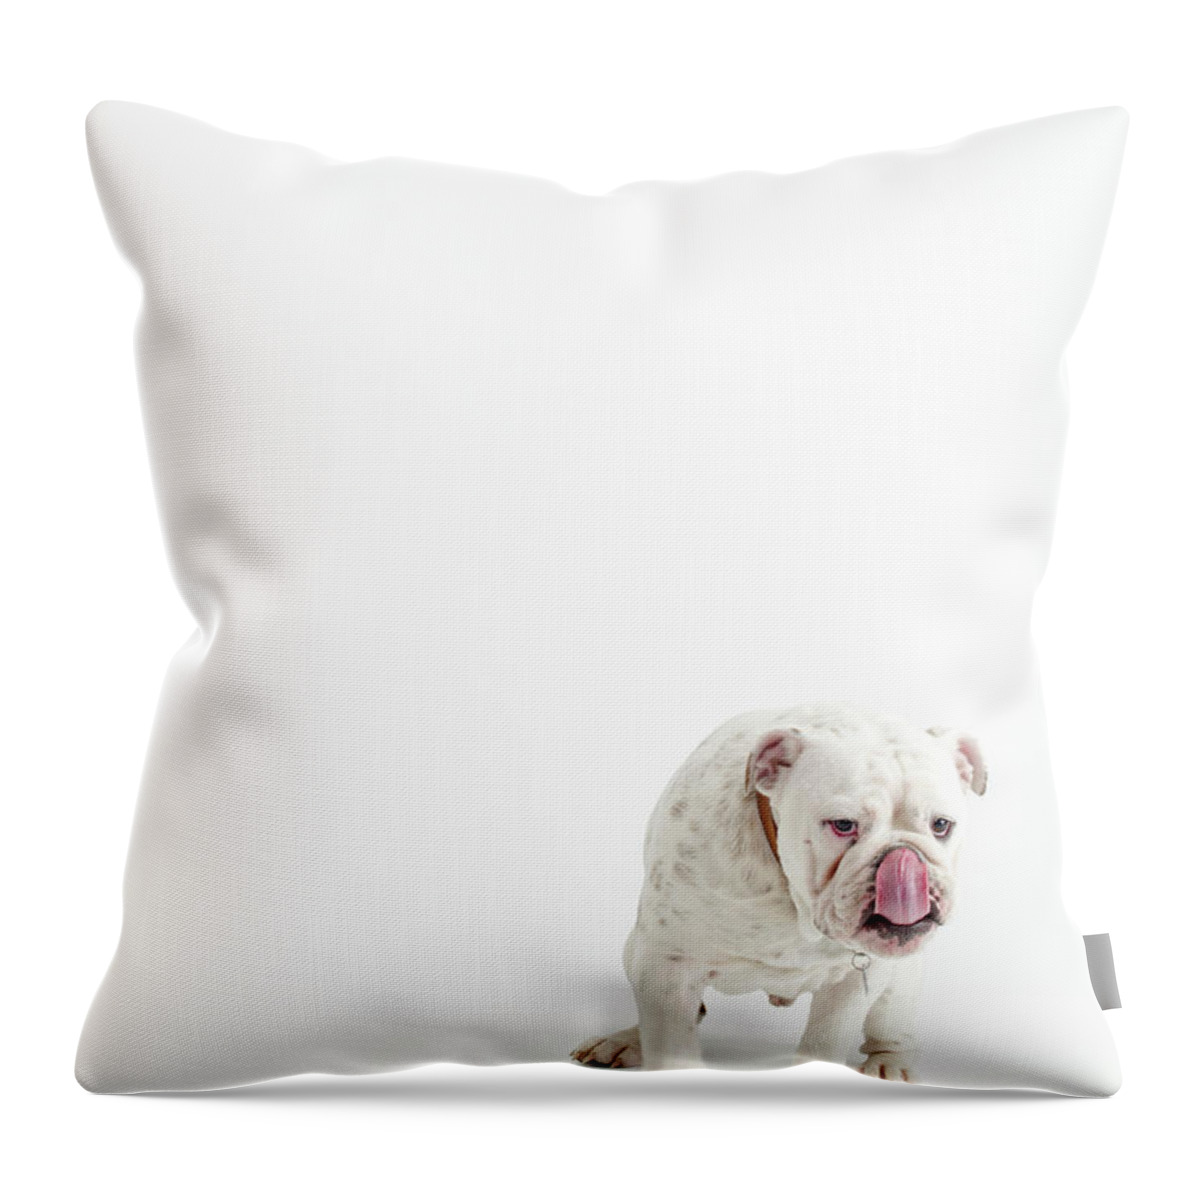 Pets Throw Pillow featuring the photograph Bulldog On White by Max Oppenheim